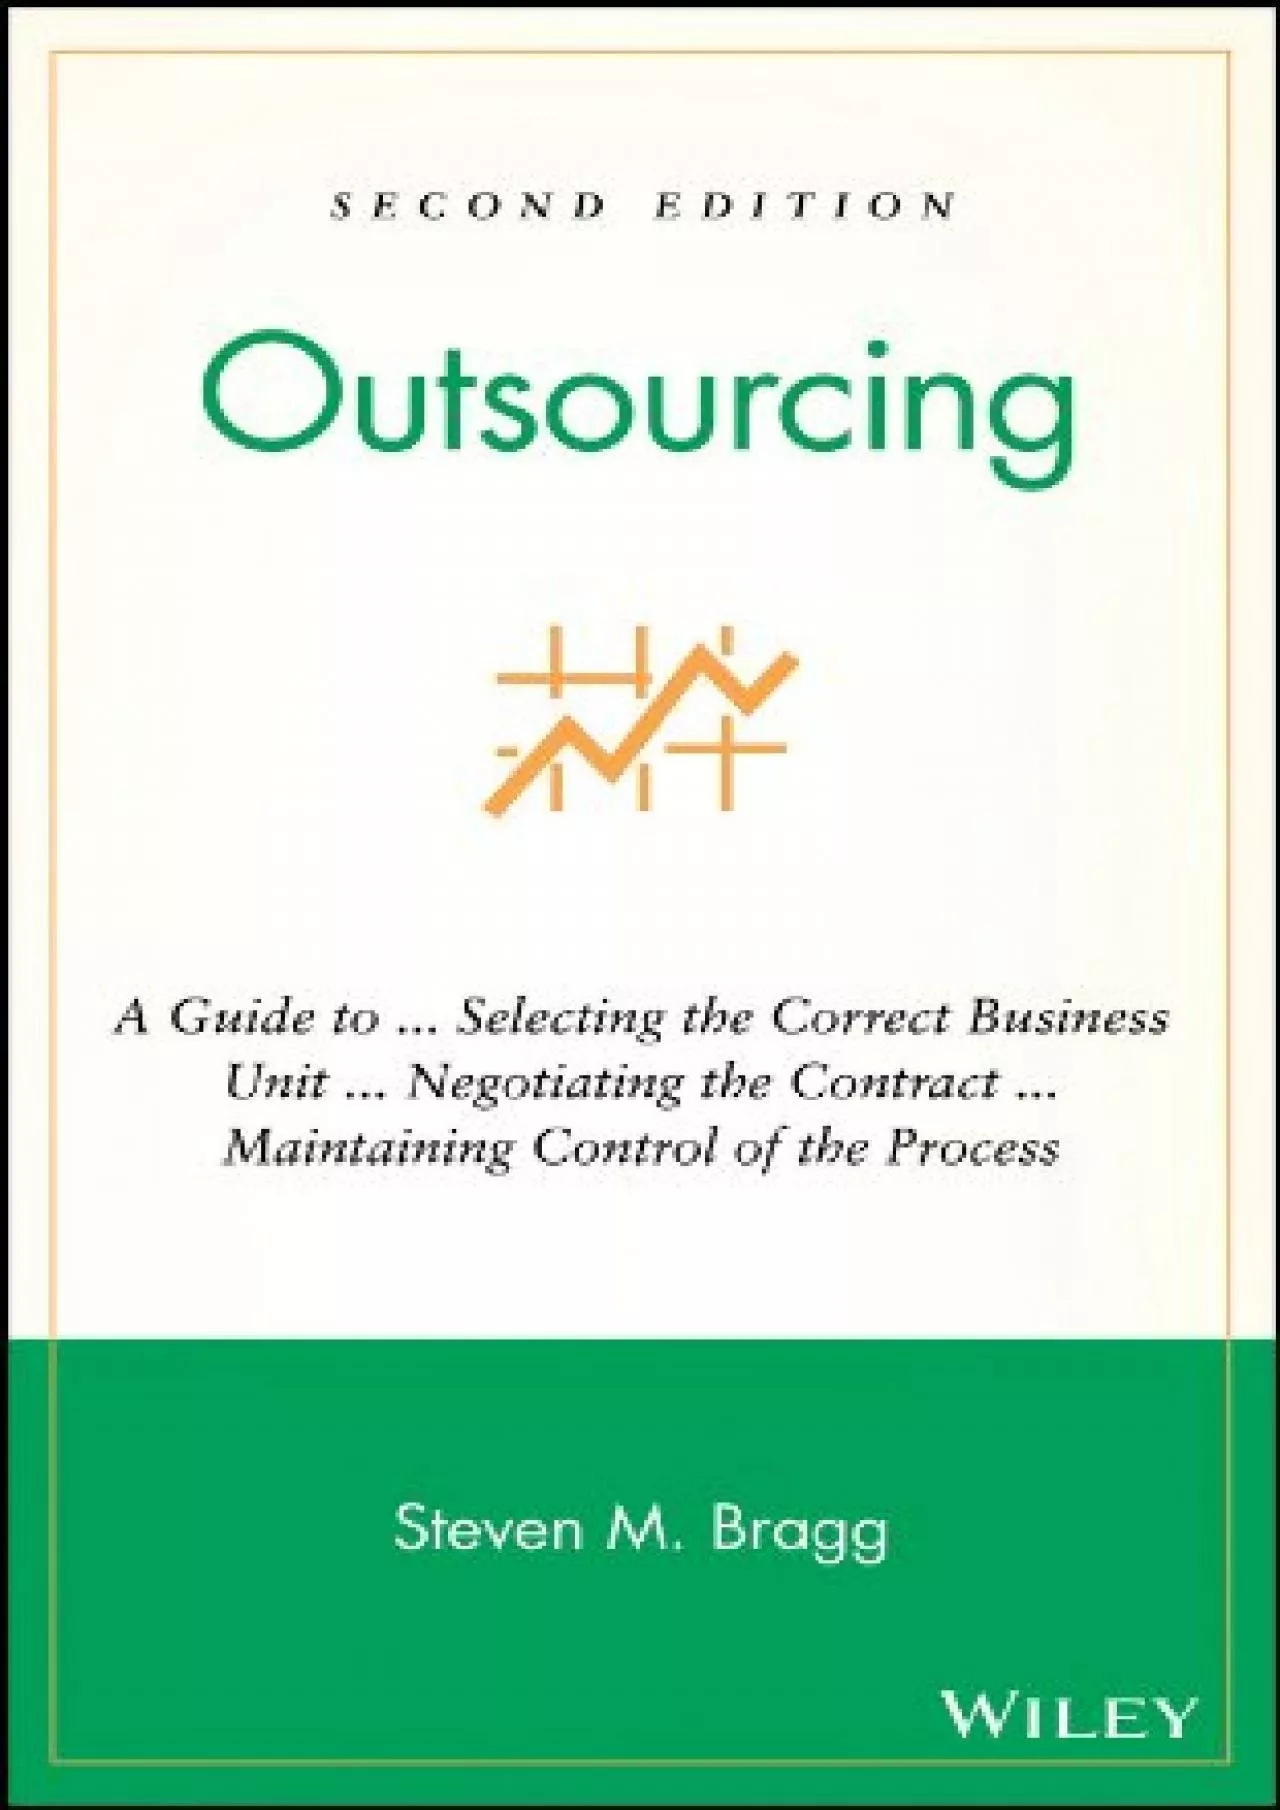 Outsourcing: A Guide to ... Selecting the Correct Business Unit ... Negotiating the Contract